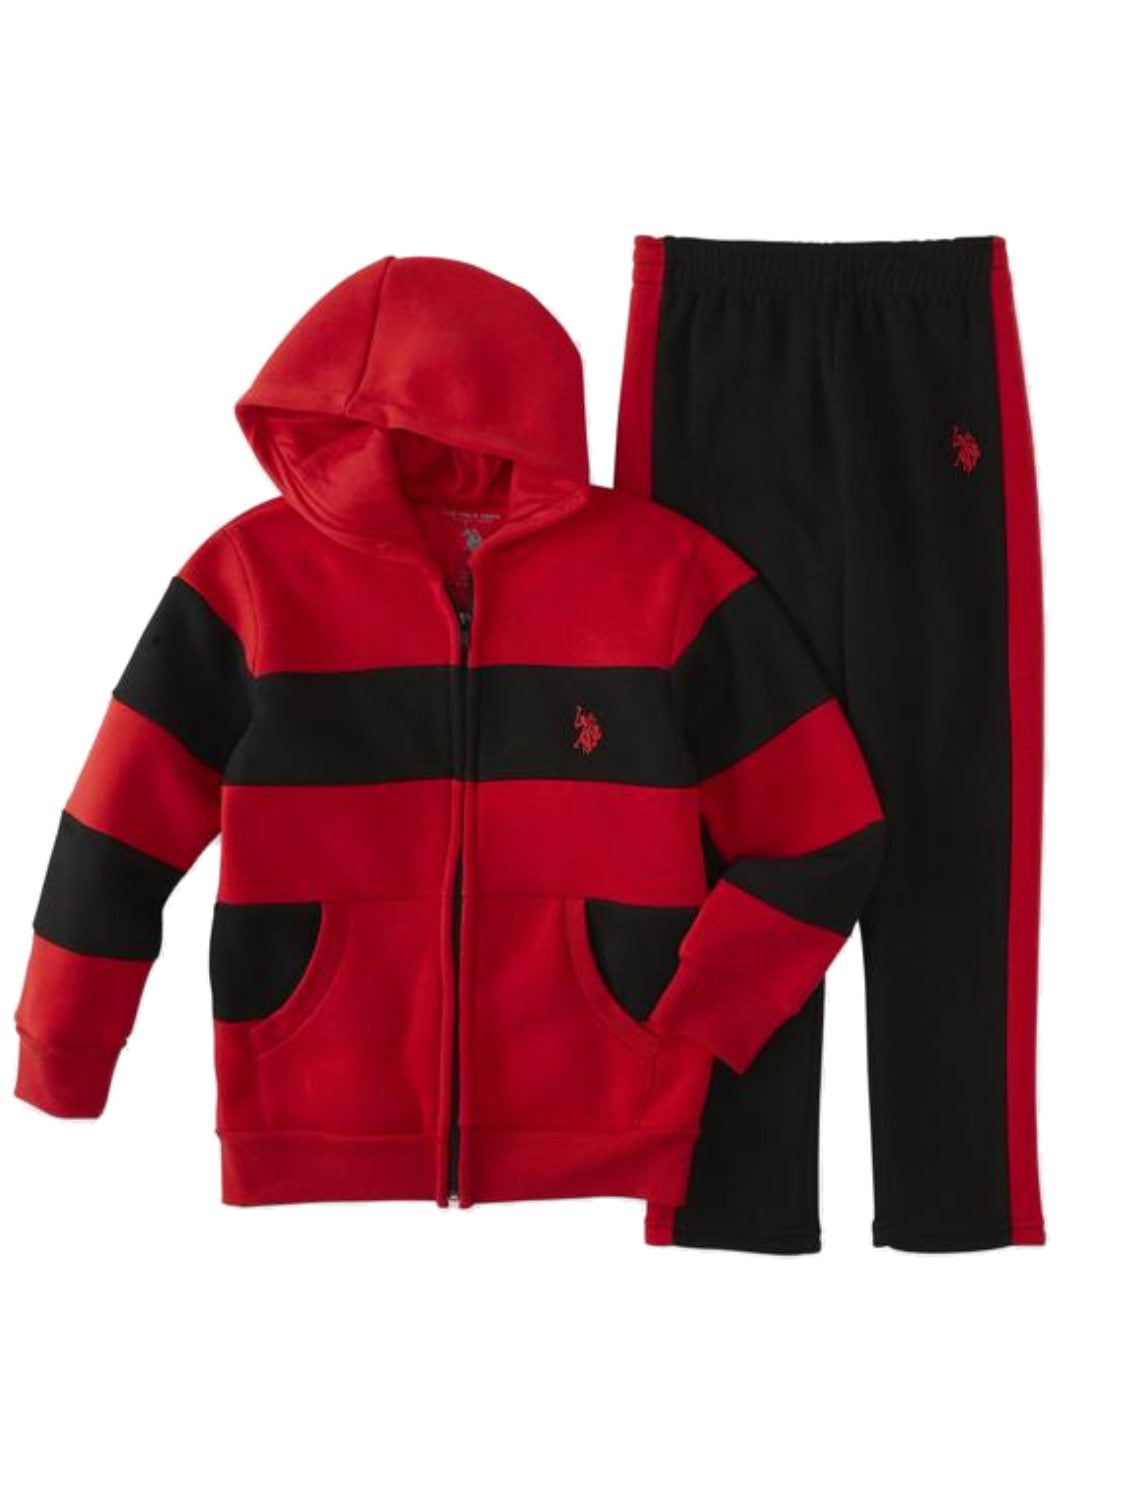 polo jacket black and red